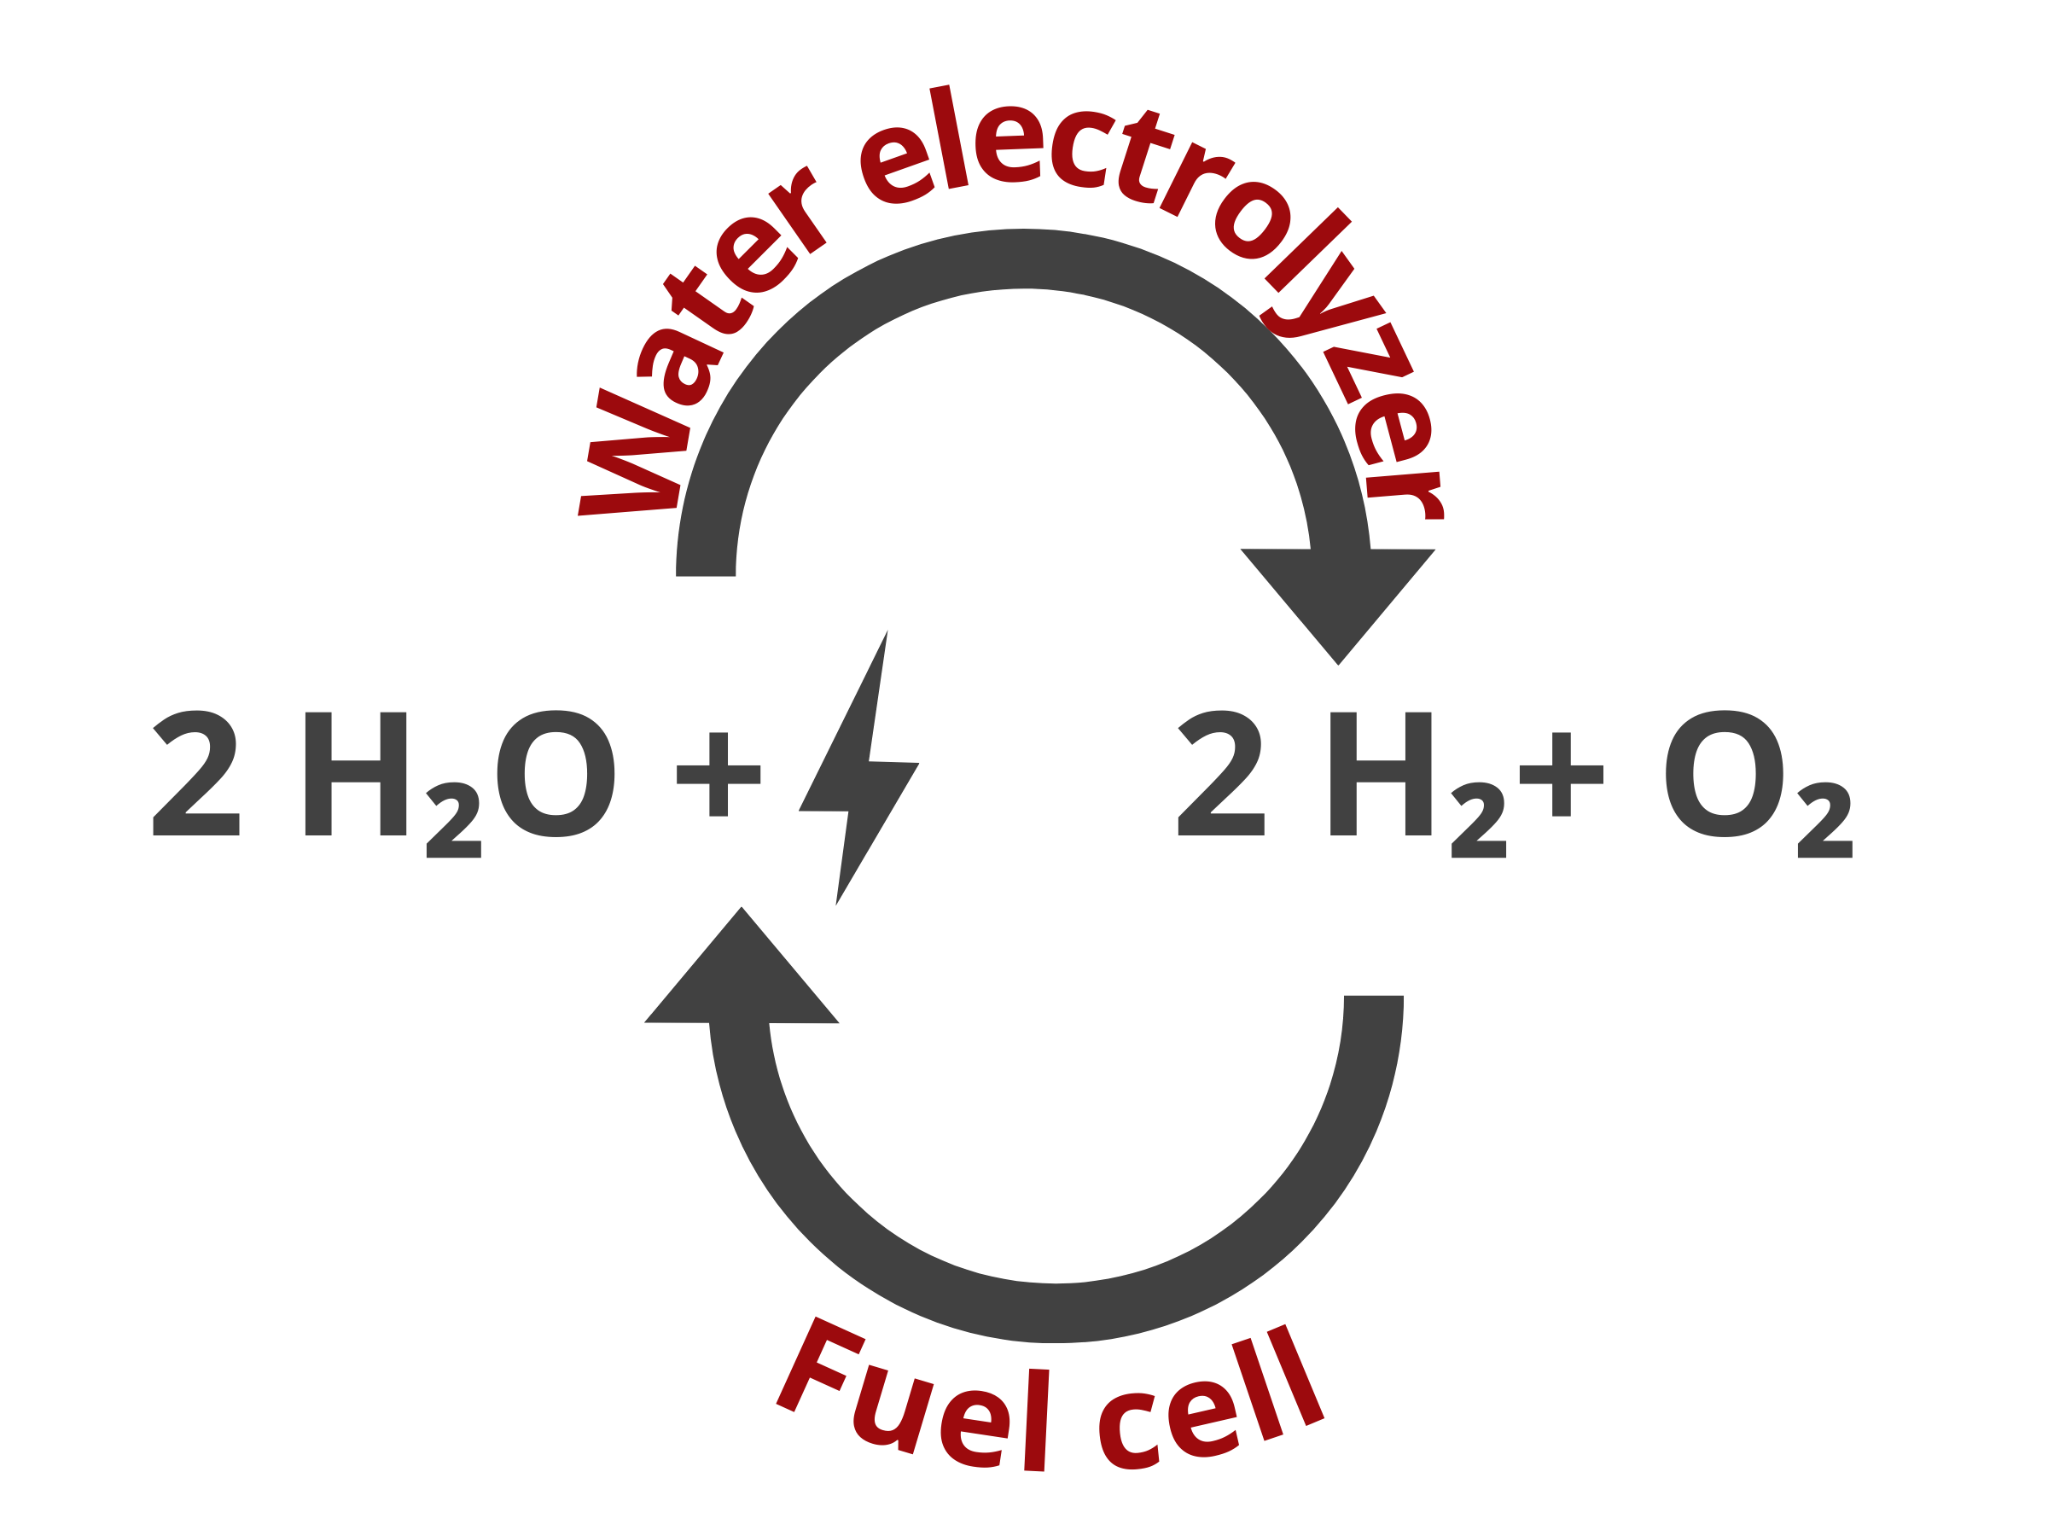 Water Electrolyzer and Fuel Cell Reactions